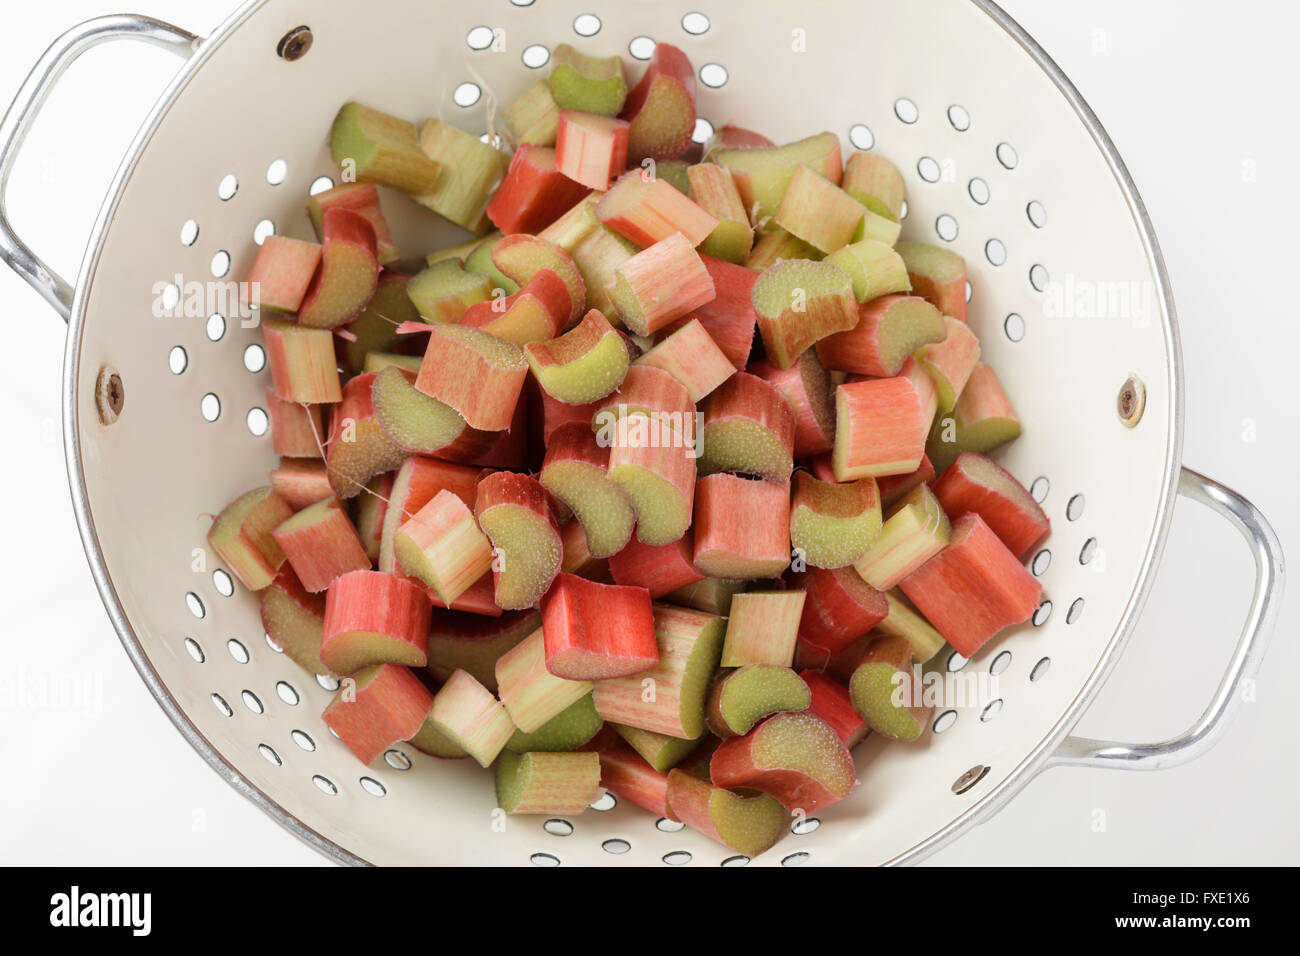 Rhubarb in a colander Stock Photo